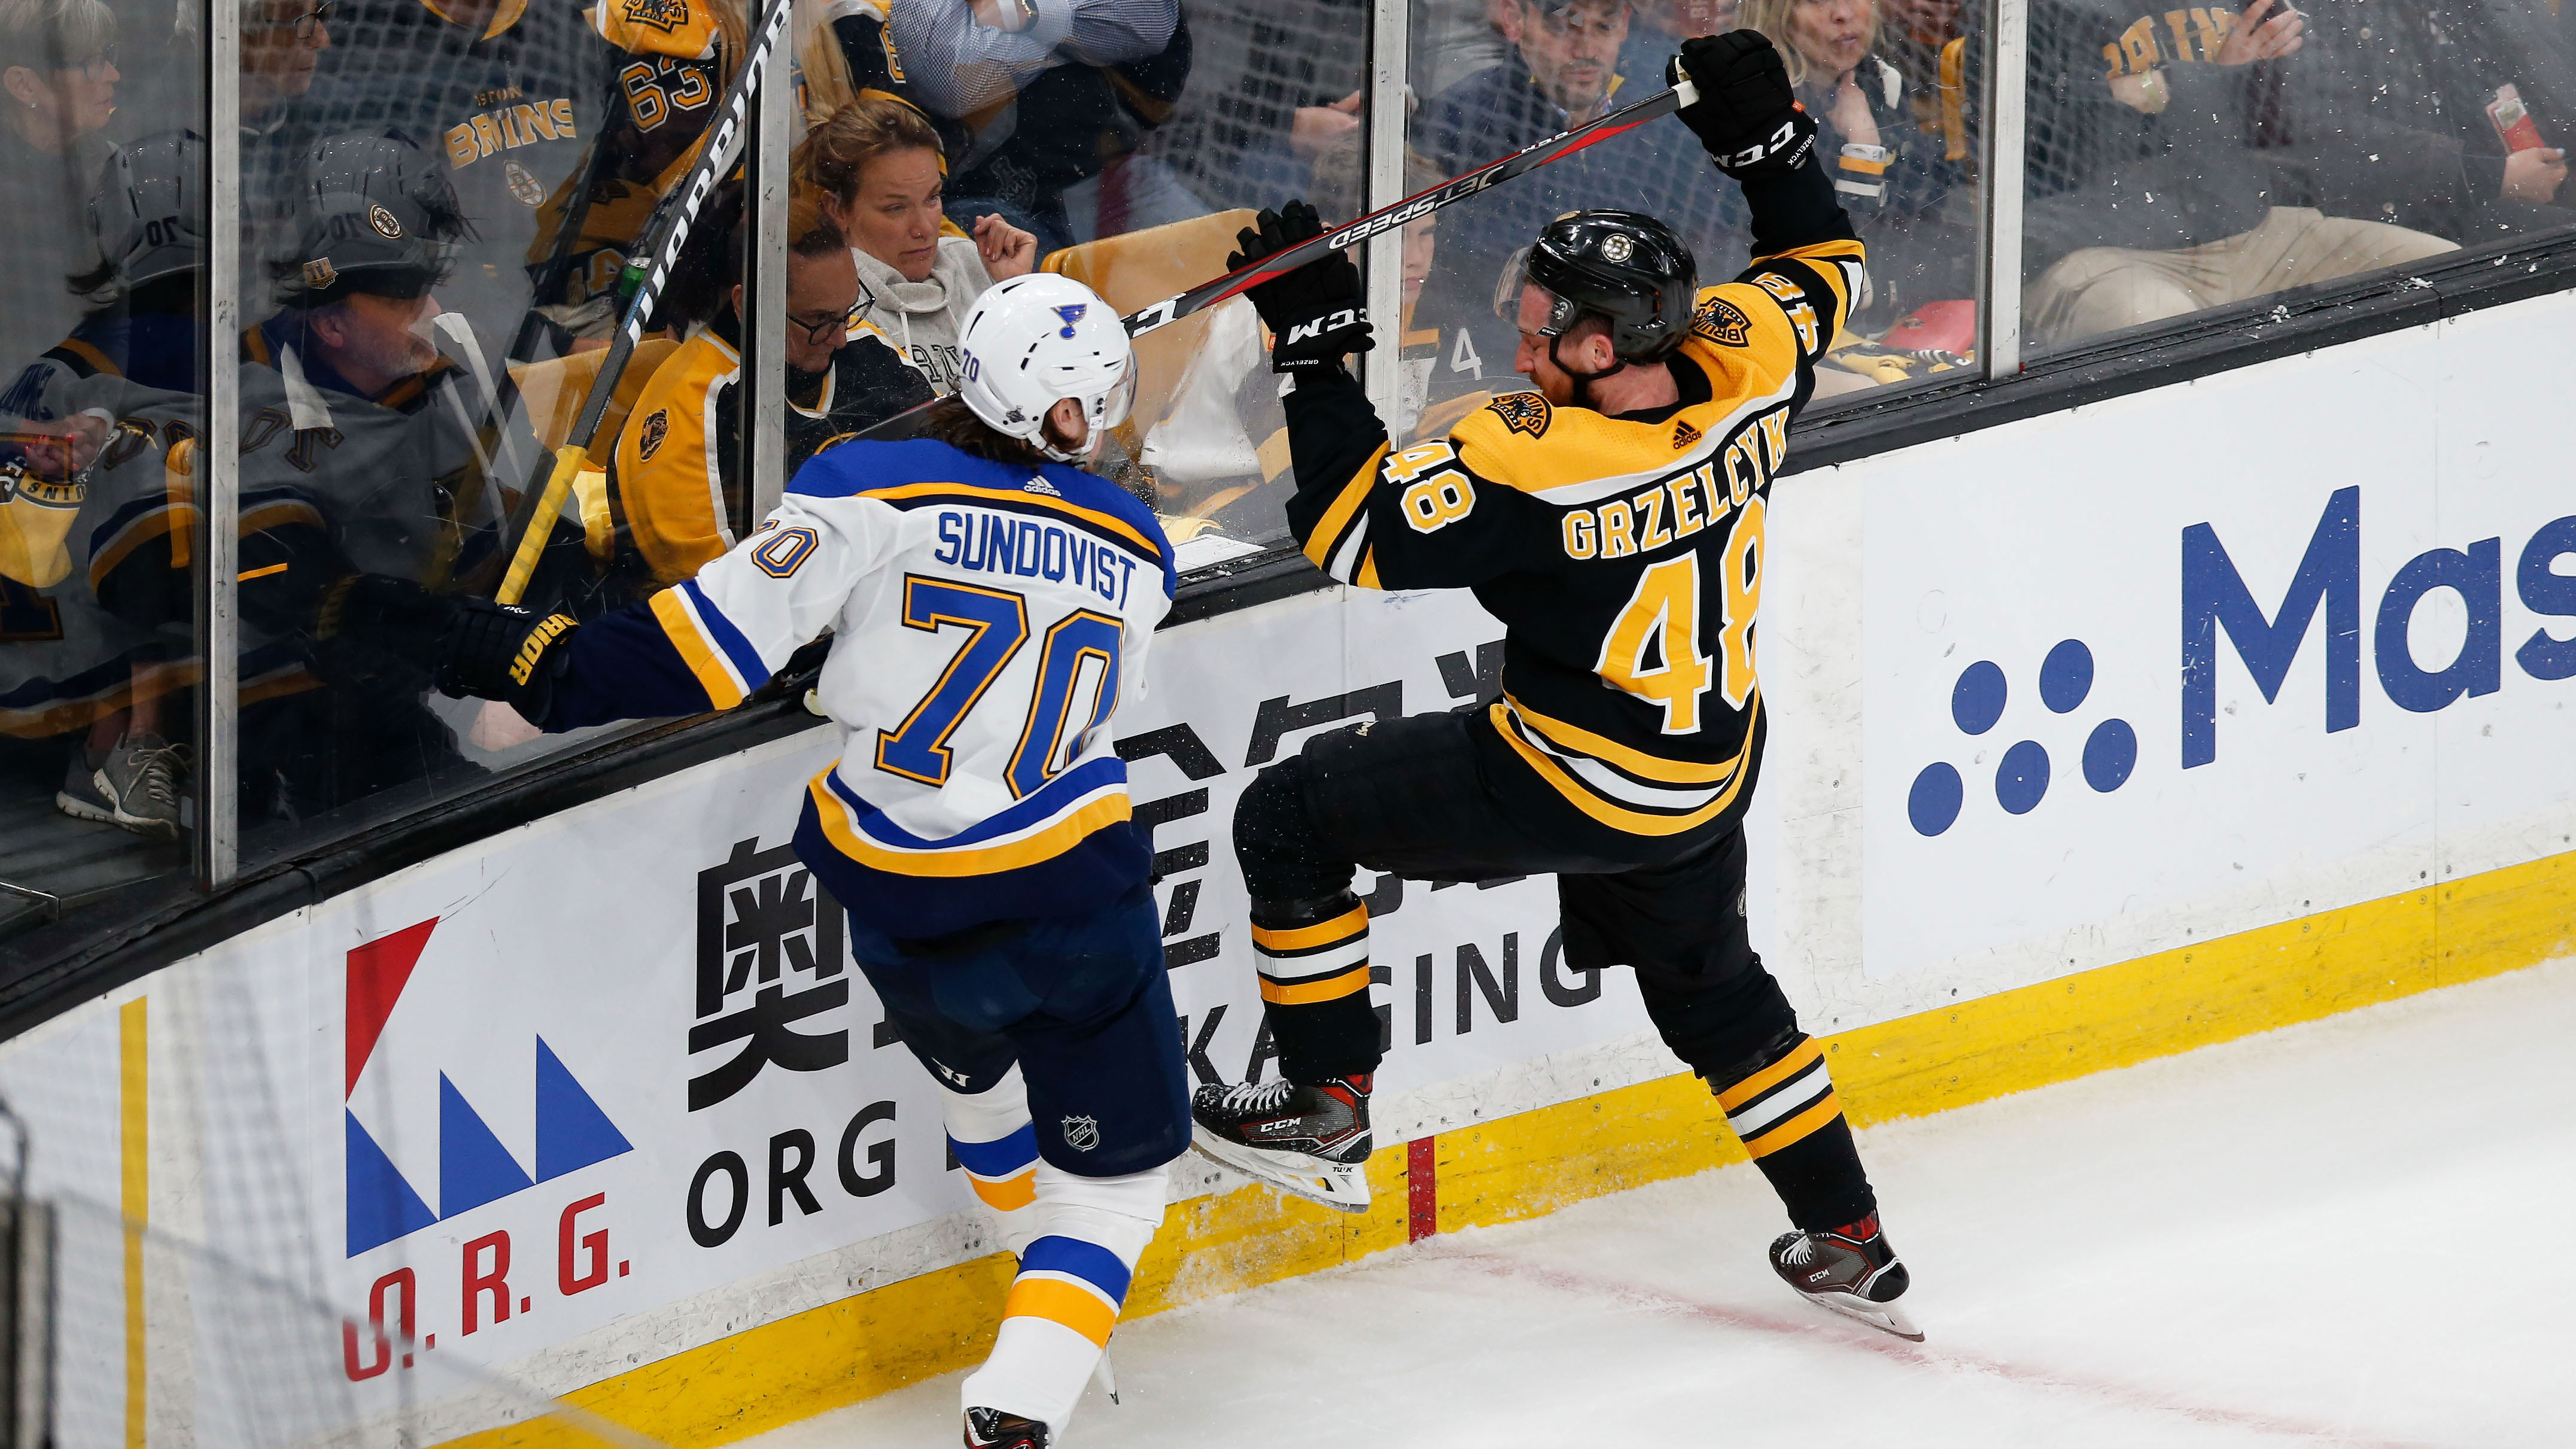 May 29, 2019; Boston, MA, USA;  St. Louis Blues center Oskar Sundqvist (70) boards Boston Bruins defenseman Matt Grzelcyk (48) during the first period in game two of the 2019 Stanley Cup Final at TD Garden. Mandatory Credit: Greg M. Cooper-USA TODAY Sports